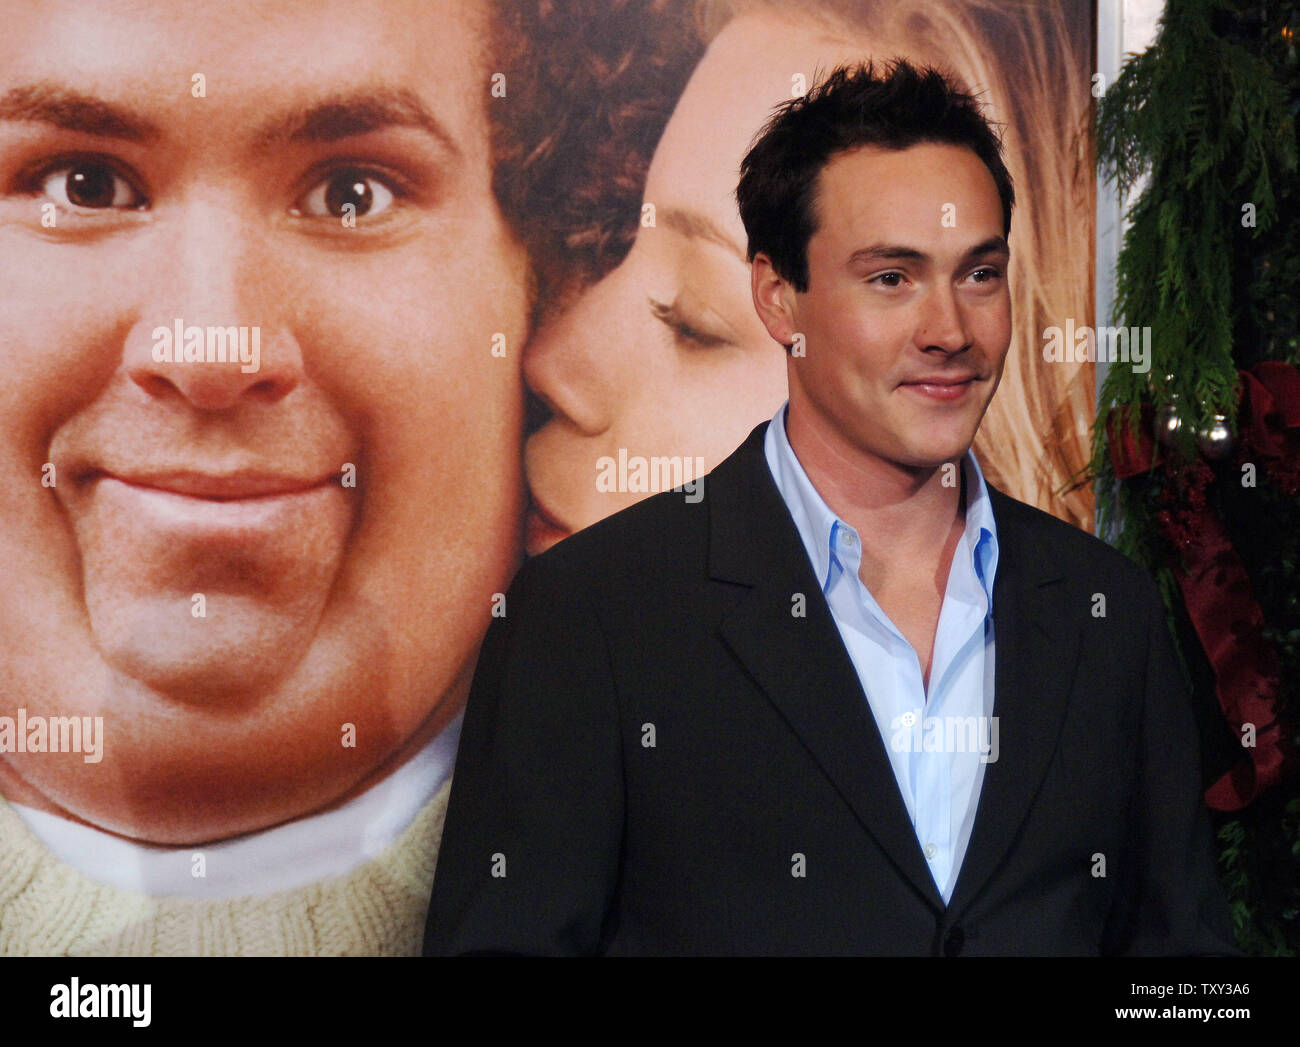 https://c8.alamy.com/comp/TXY3A6/actor-chris-klein-a-cast-member-in-the-romantic-comedy-motion-picture-just-friends-arrives-for-the-premiere-of-the-film-in-the-westwood-section-of-los-angeles-november-14-2005-upi-photojim-ruymen-TXY3A6.jpg